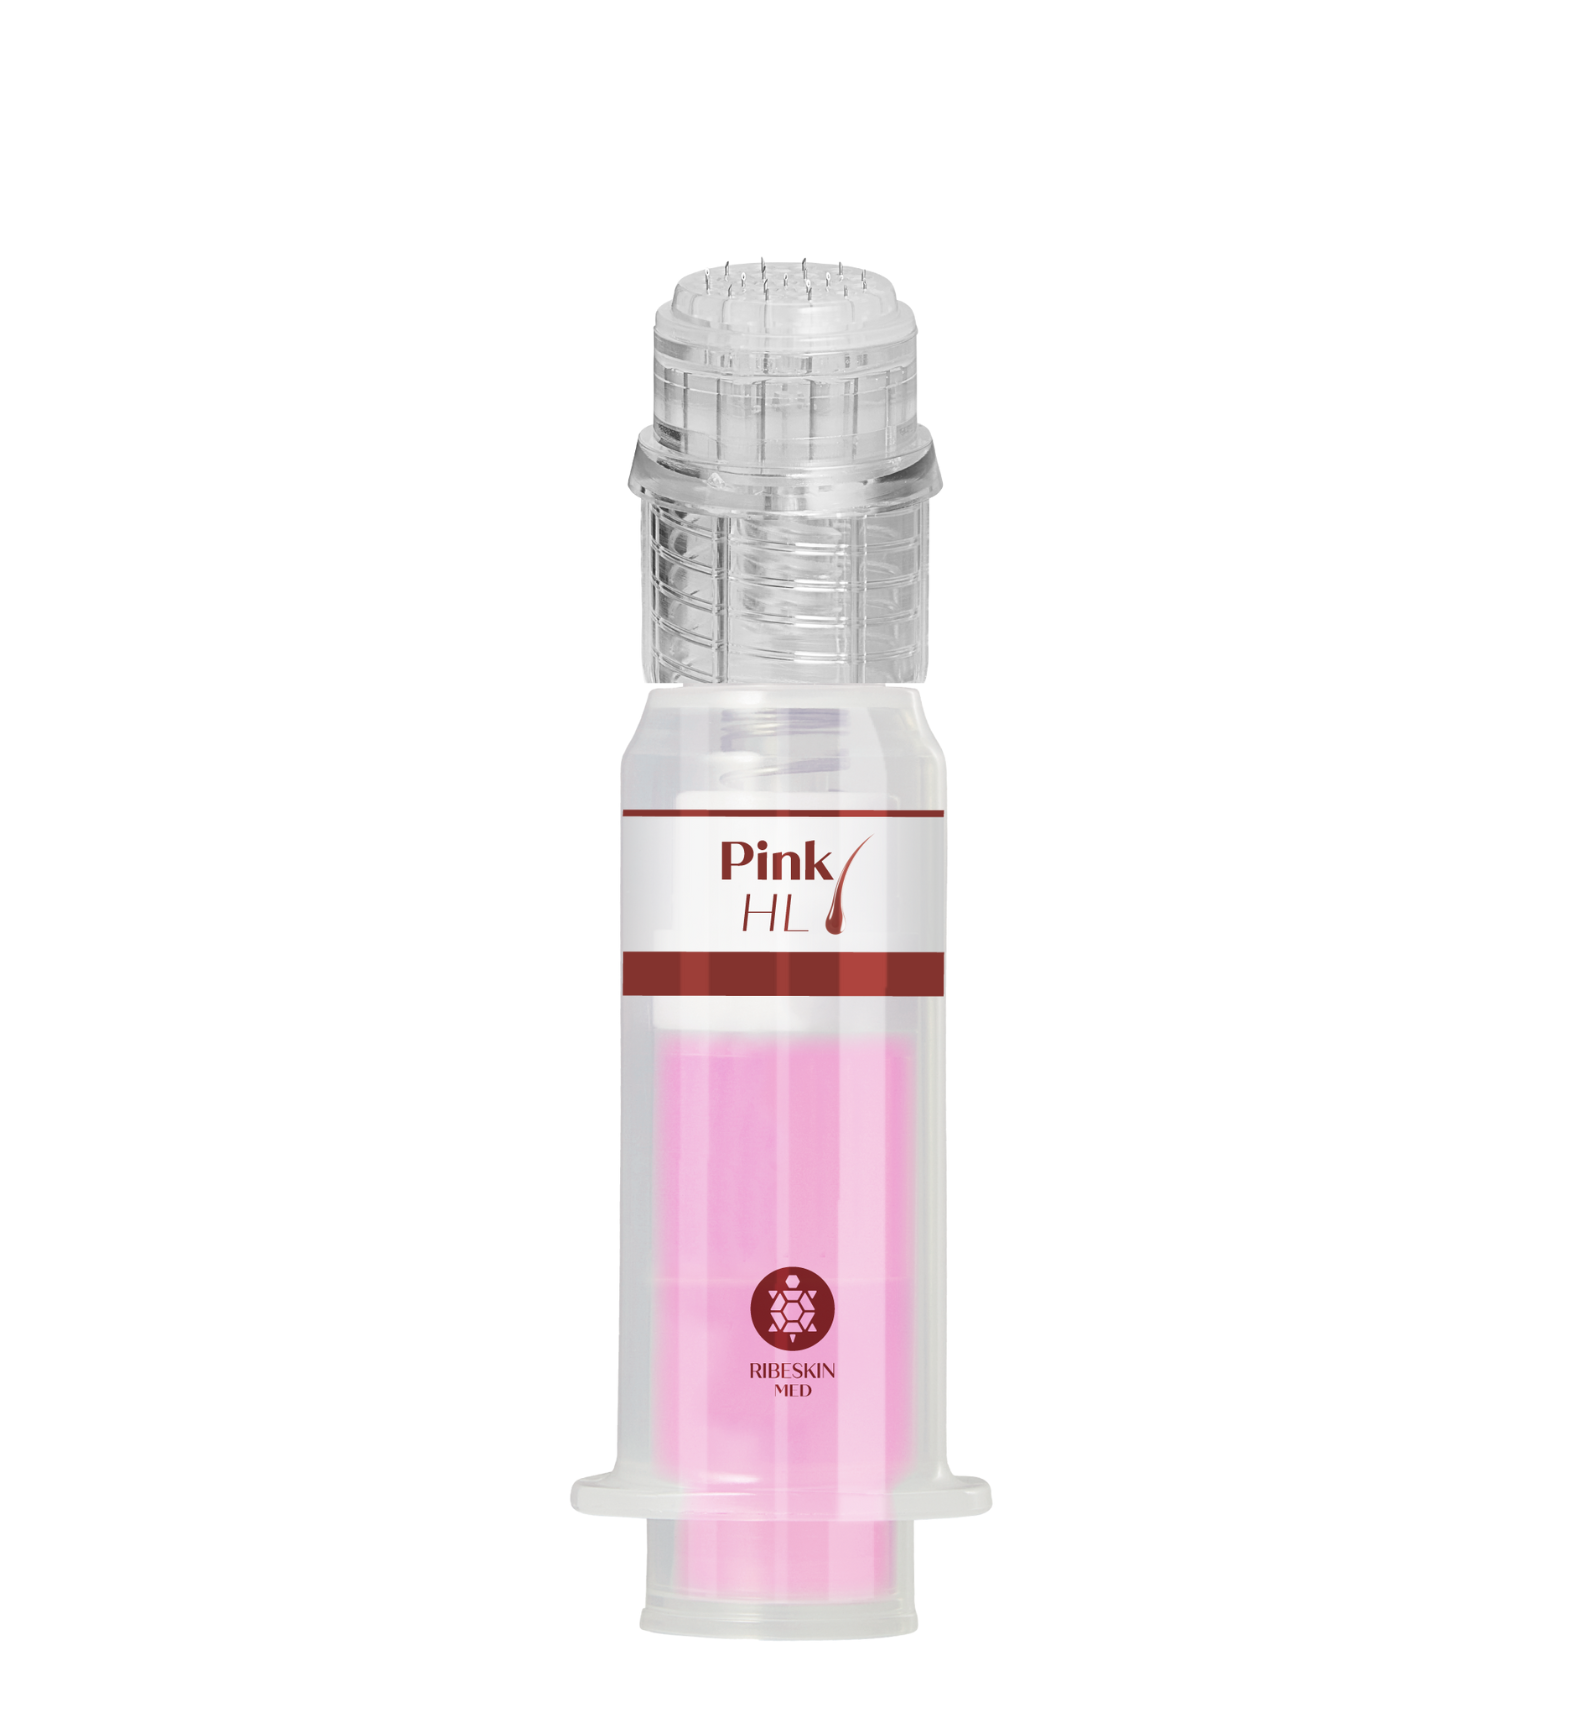 ribeskin pink hl product for hair loss treatment